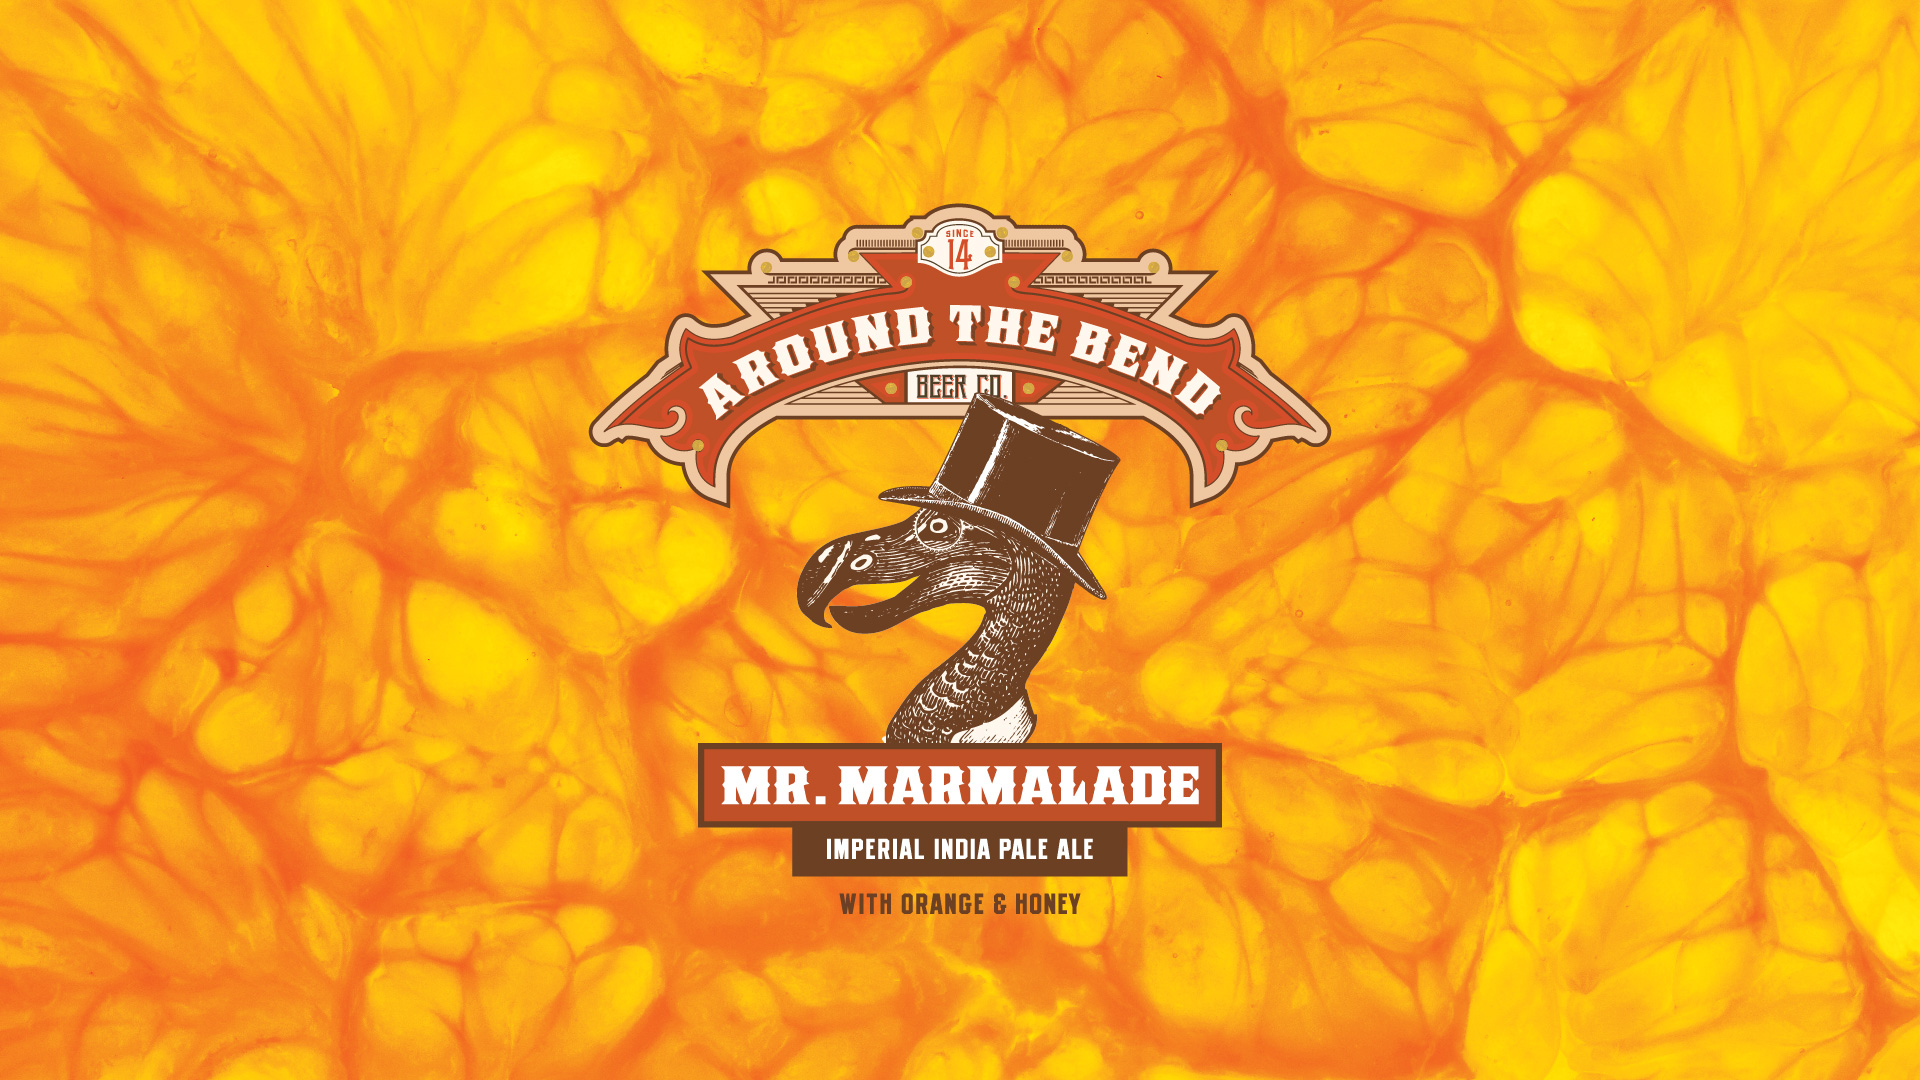 Oz Mfg. Company Around The Bend Beer Co. Mr. Marmalade Imperial IPA Branding